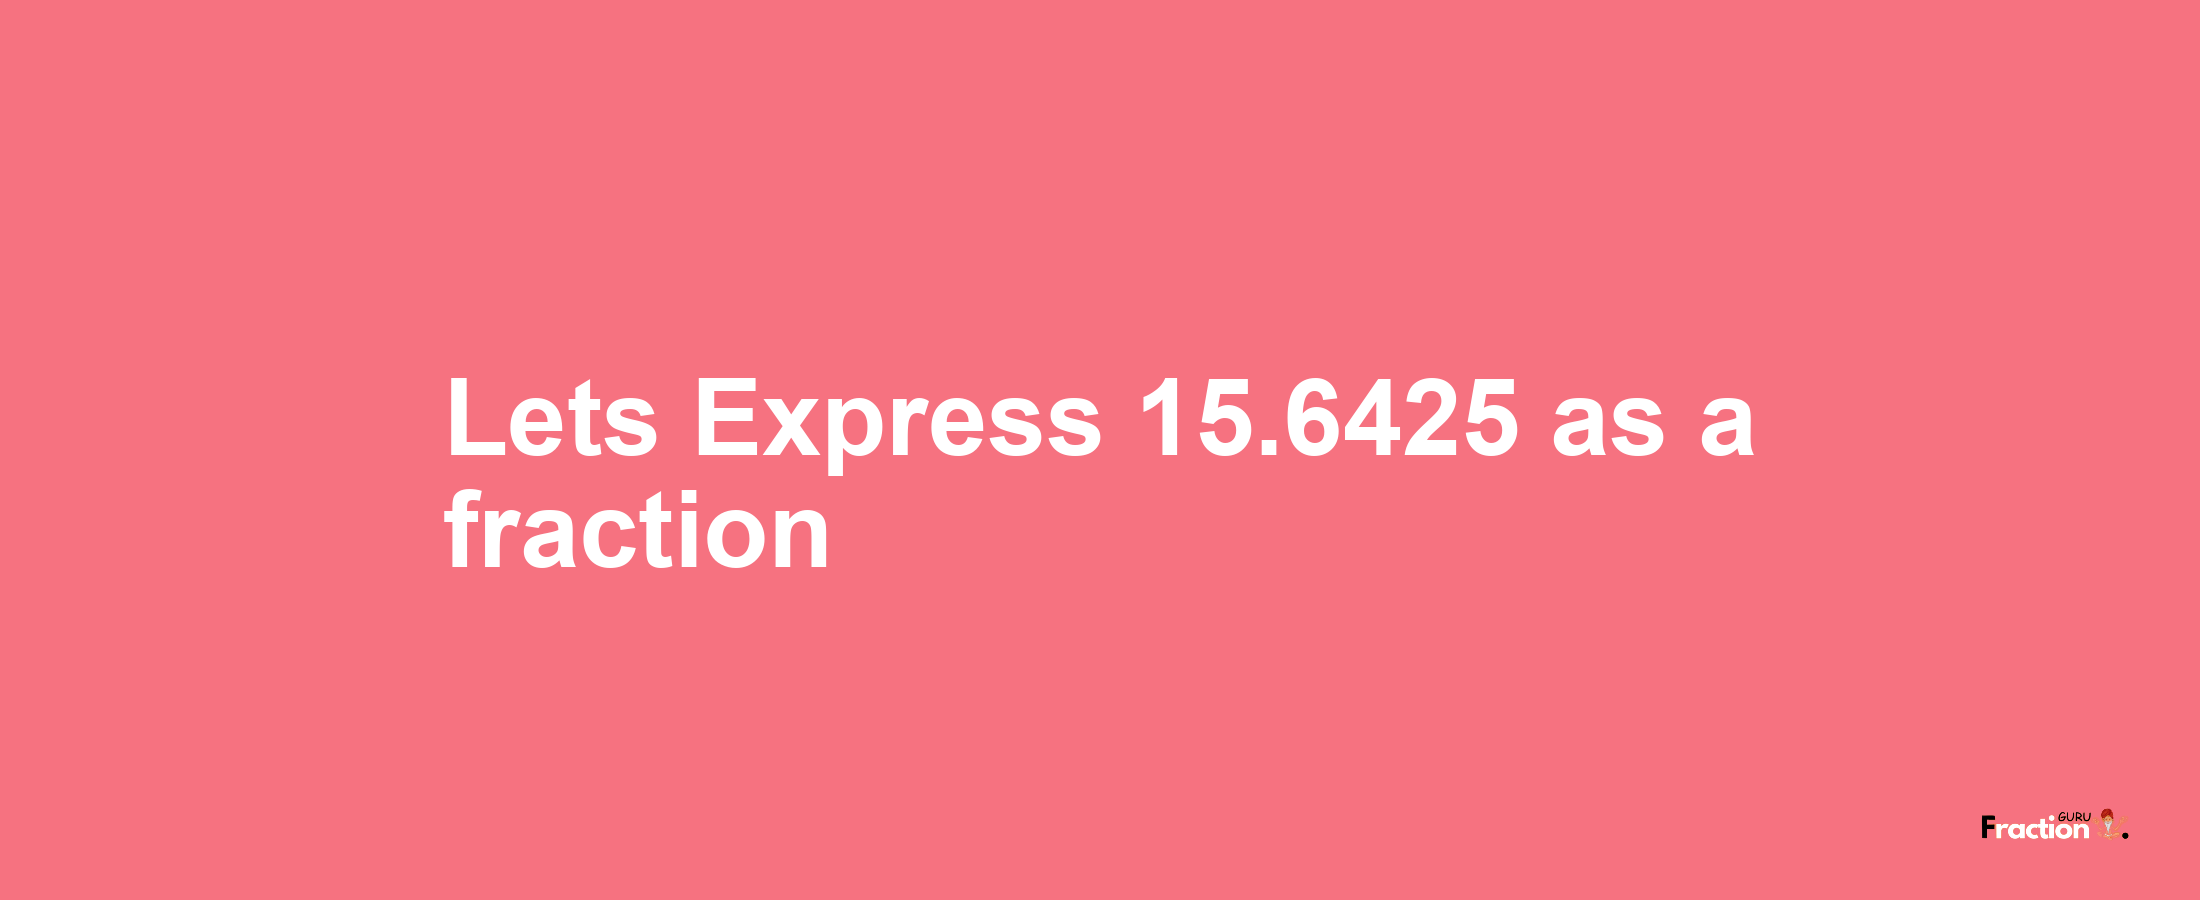 Lets Express 15.6425 as afraction